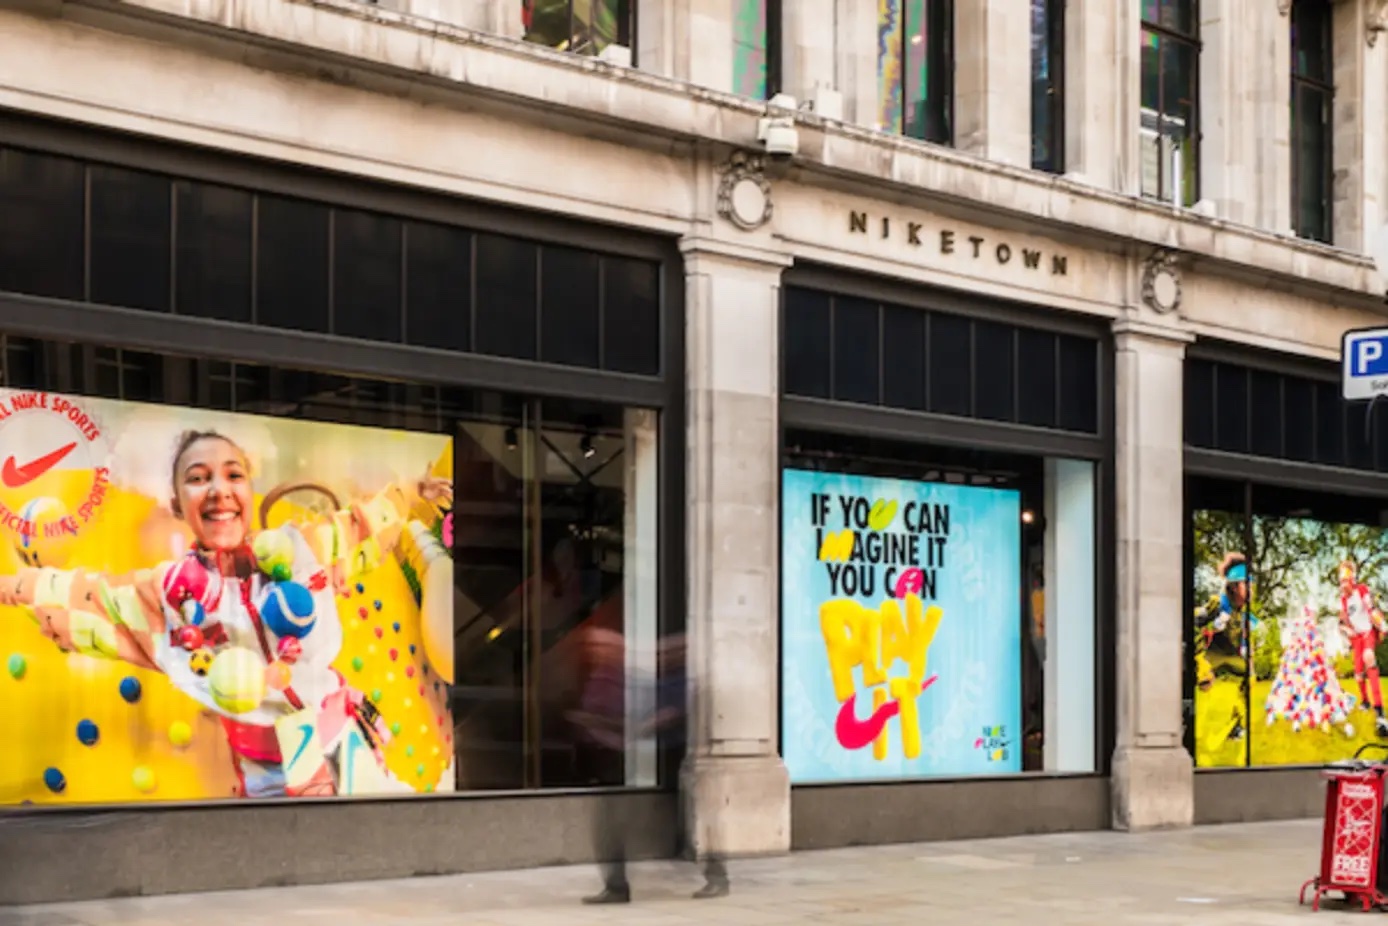 Niketown London's PLAYlab gets children involved in experiential sports ...